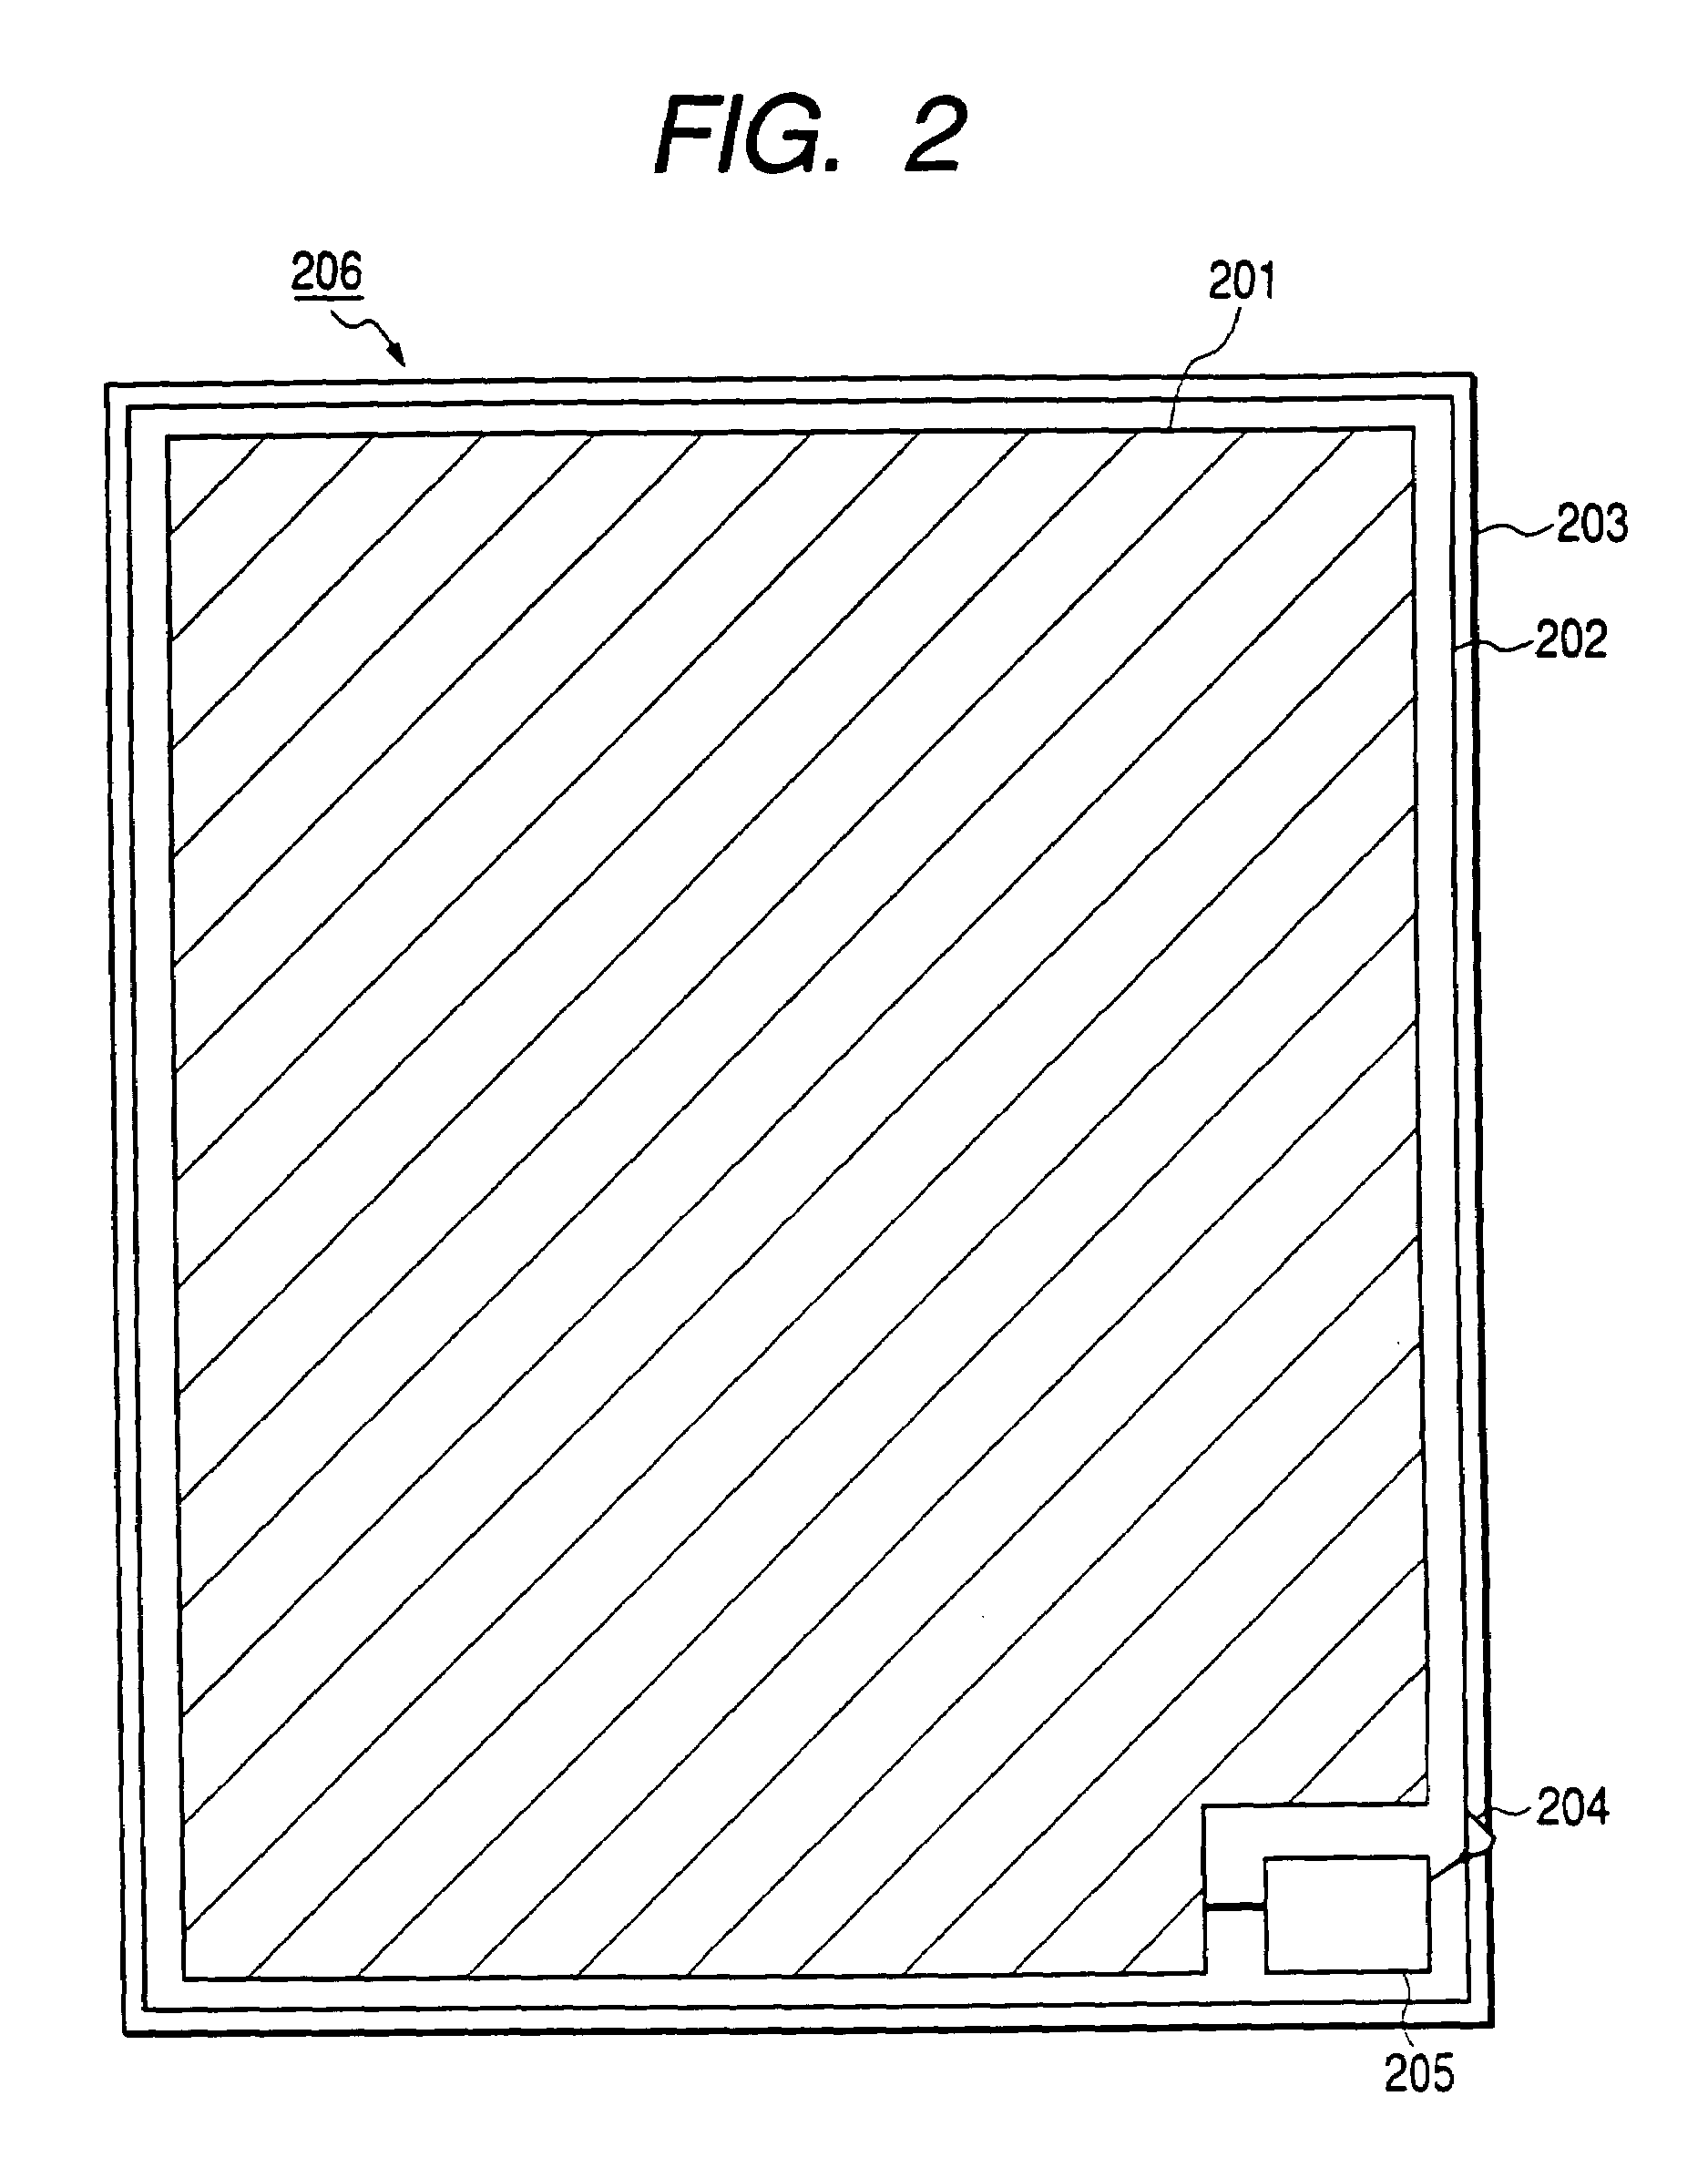 Photovoltaic power generation systems and methods of controlling photovoltaic power generation systems